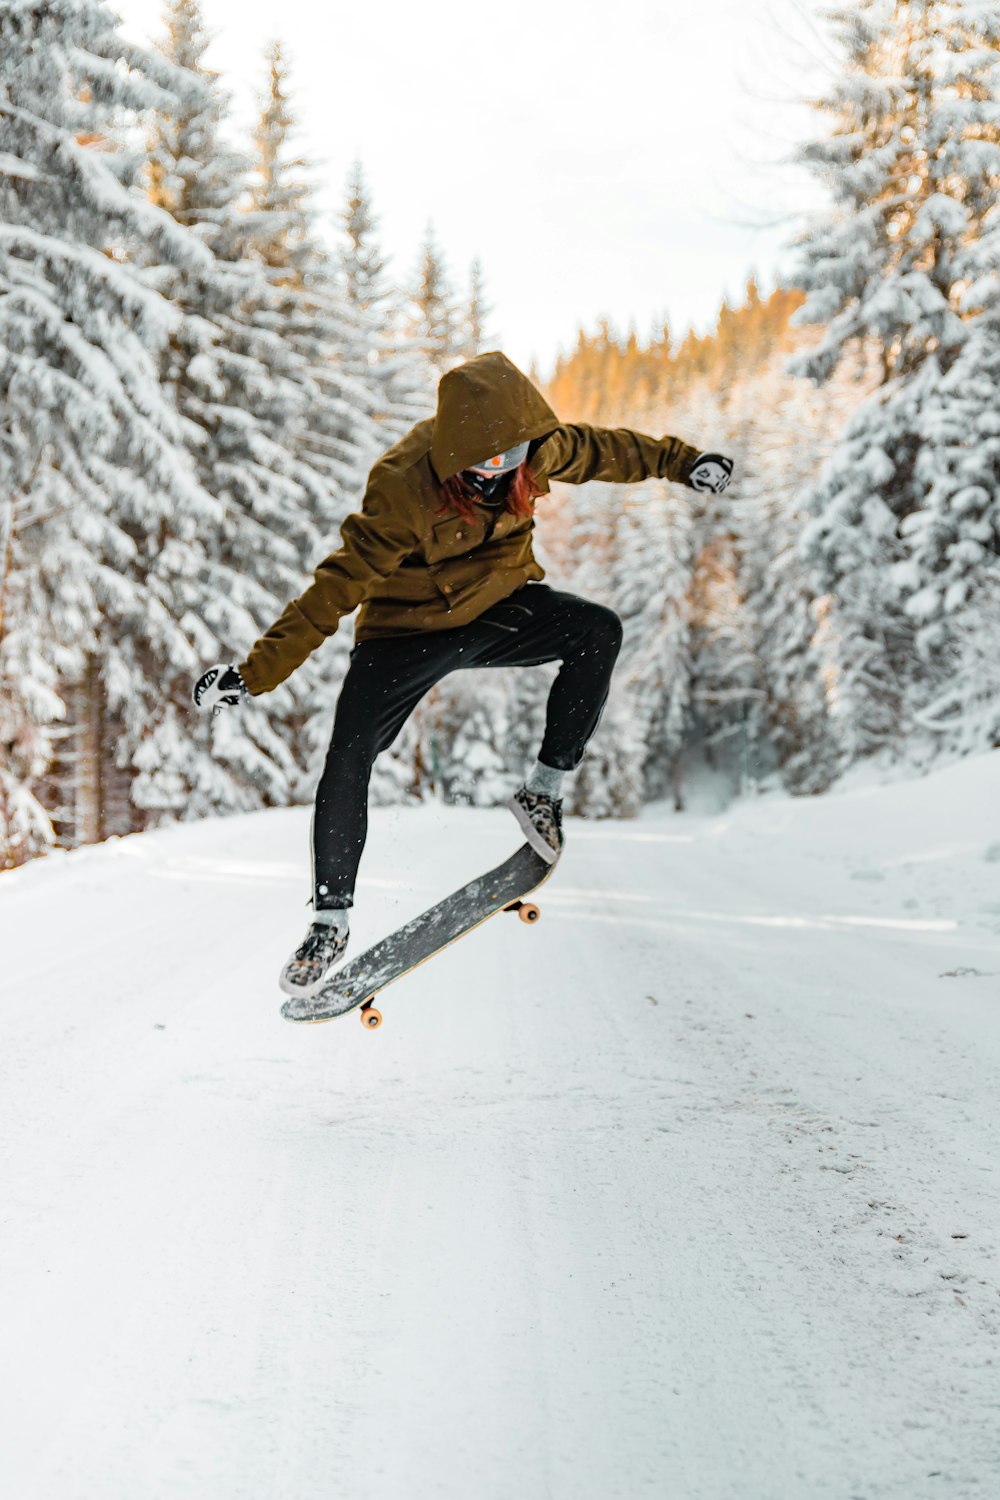 man doing tricks on a skateboard in mid air during winter